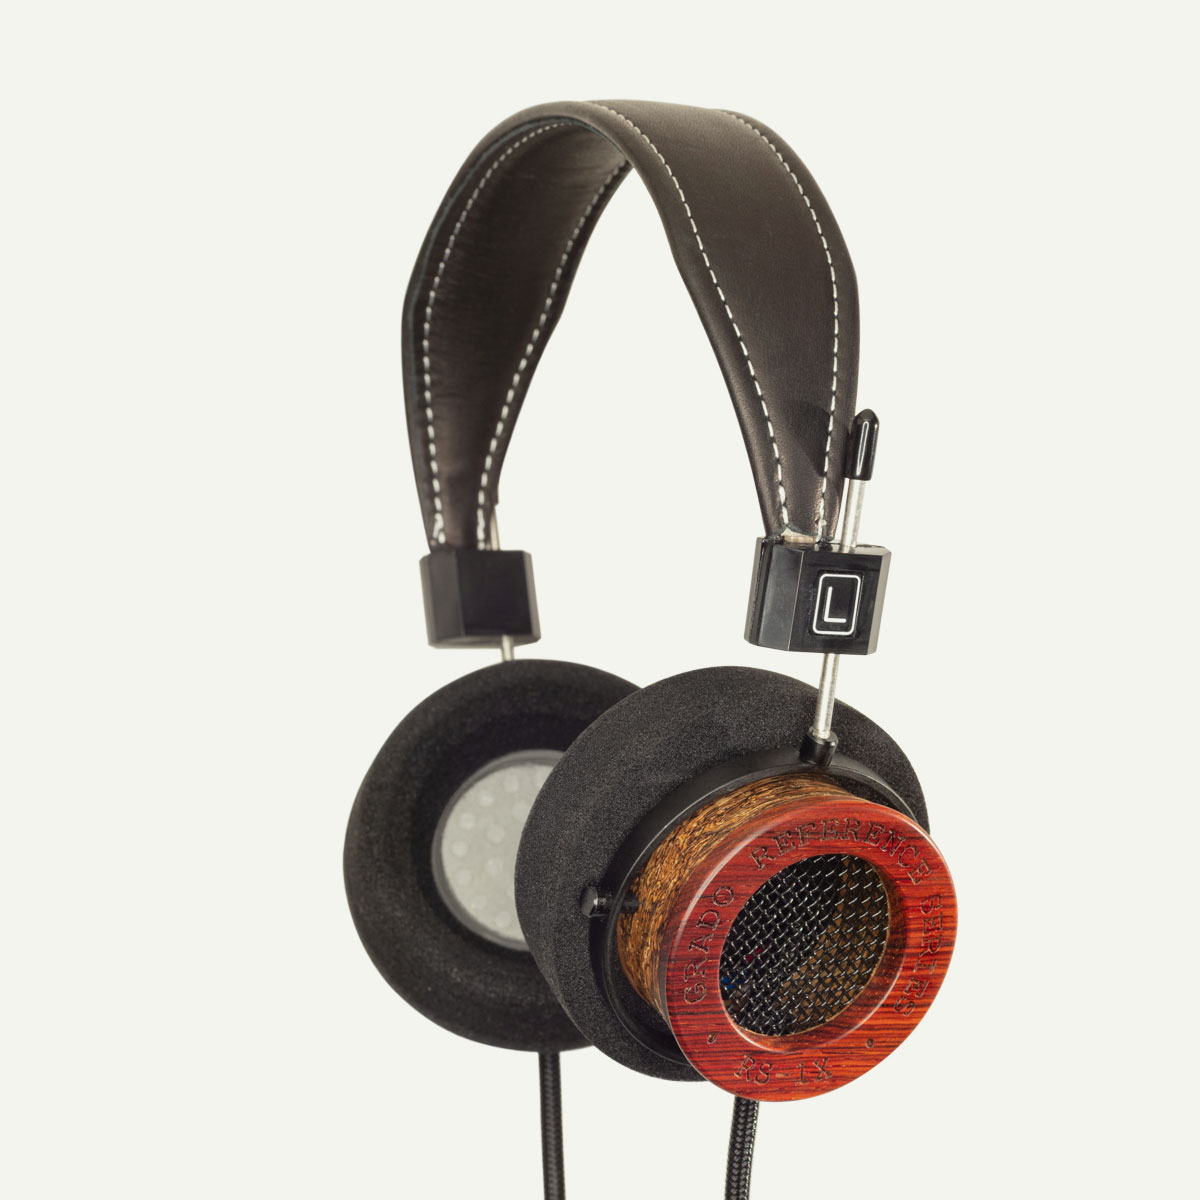 Photo of RS1X Headphones taken from a 3/4 view with a transparent background.